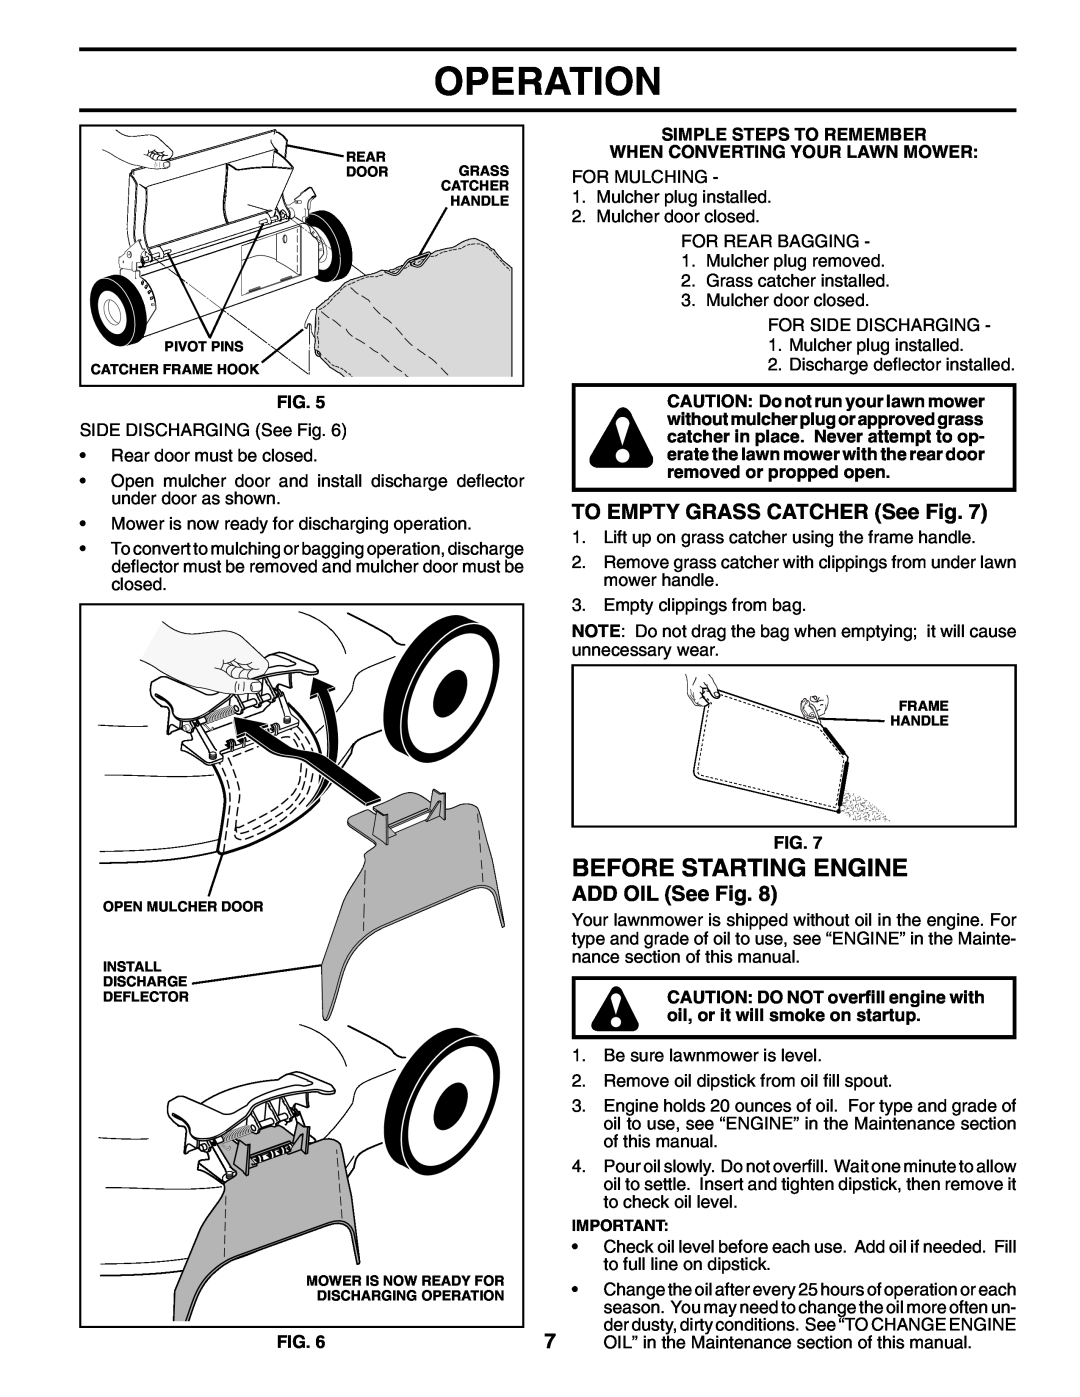 Husqvarna 5521 CHV 96143000106 manual Before Starting Engine, TO EMPTY GRASS CATCHER See Fig, ADD OIL See Fig, Operation 